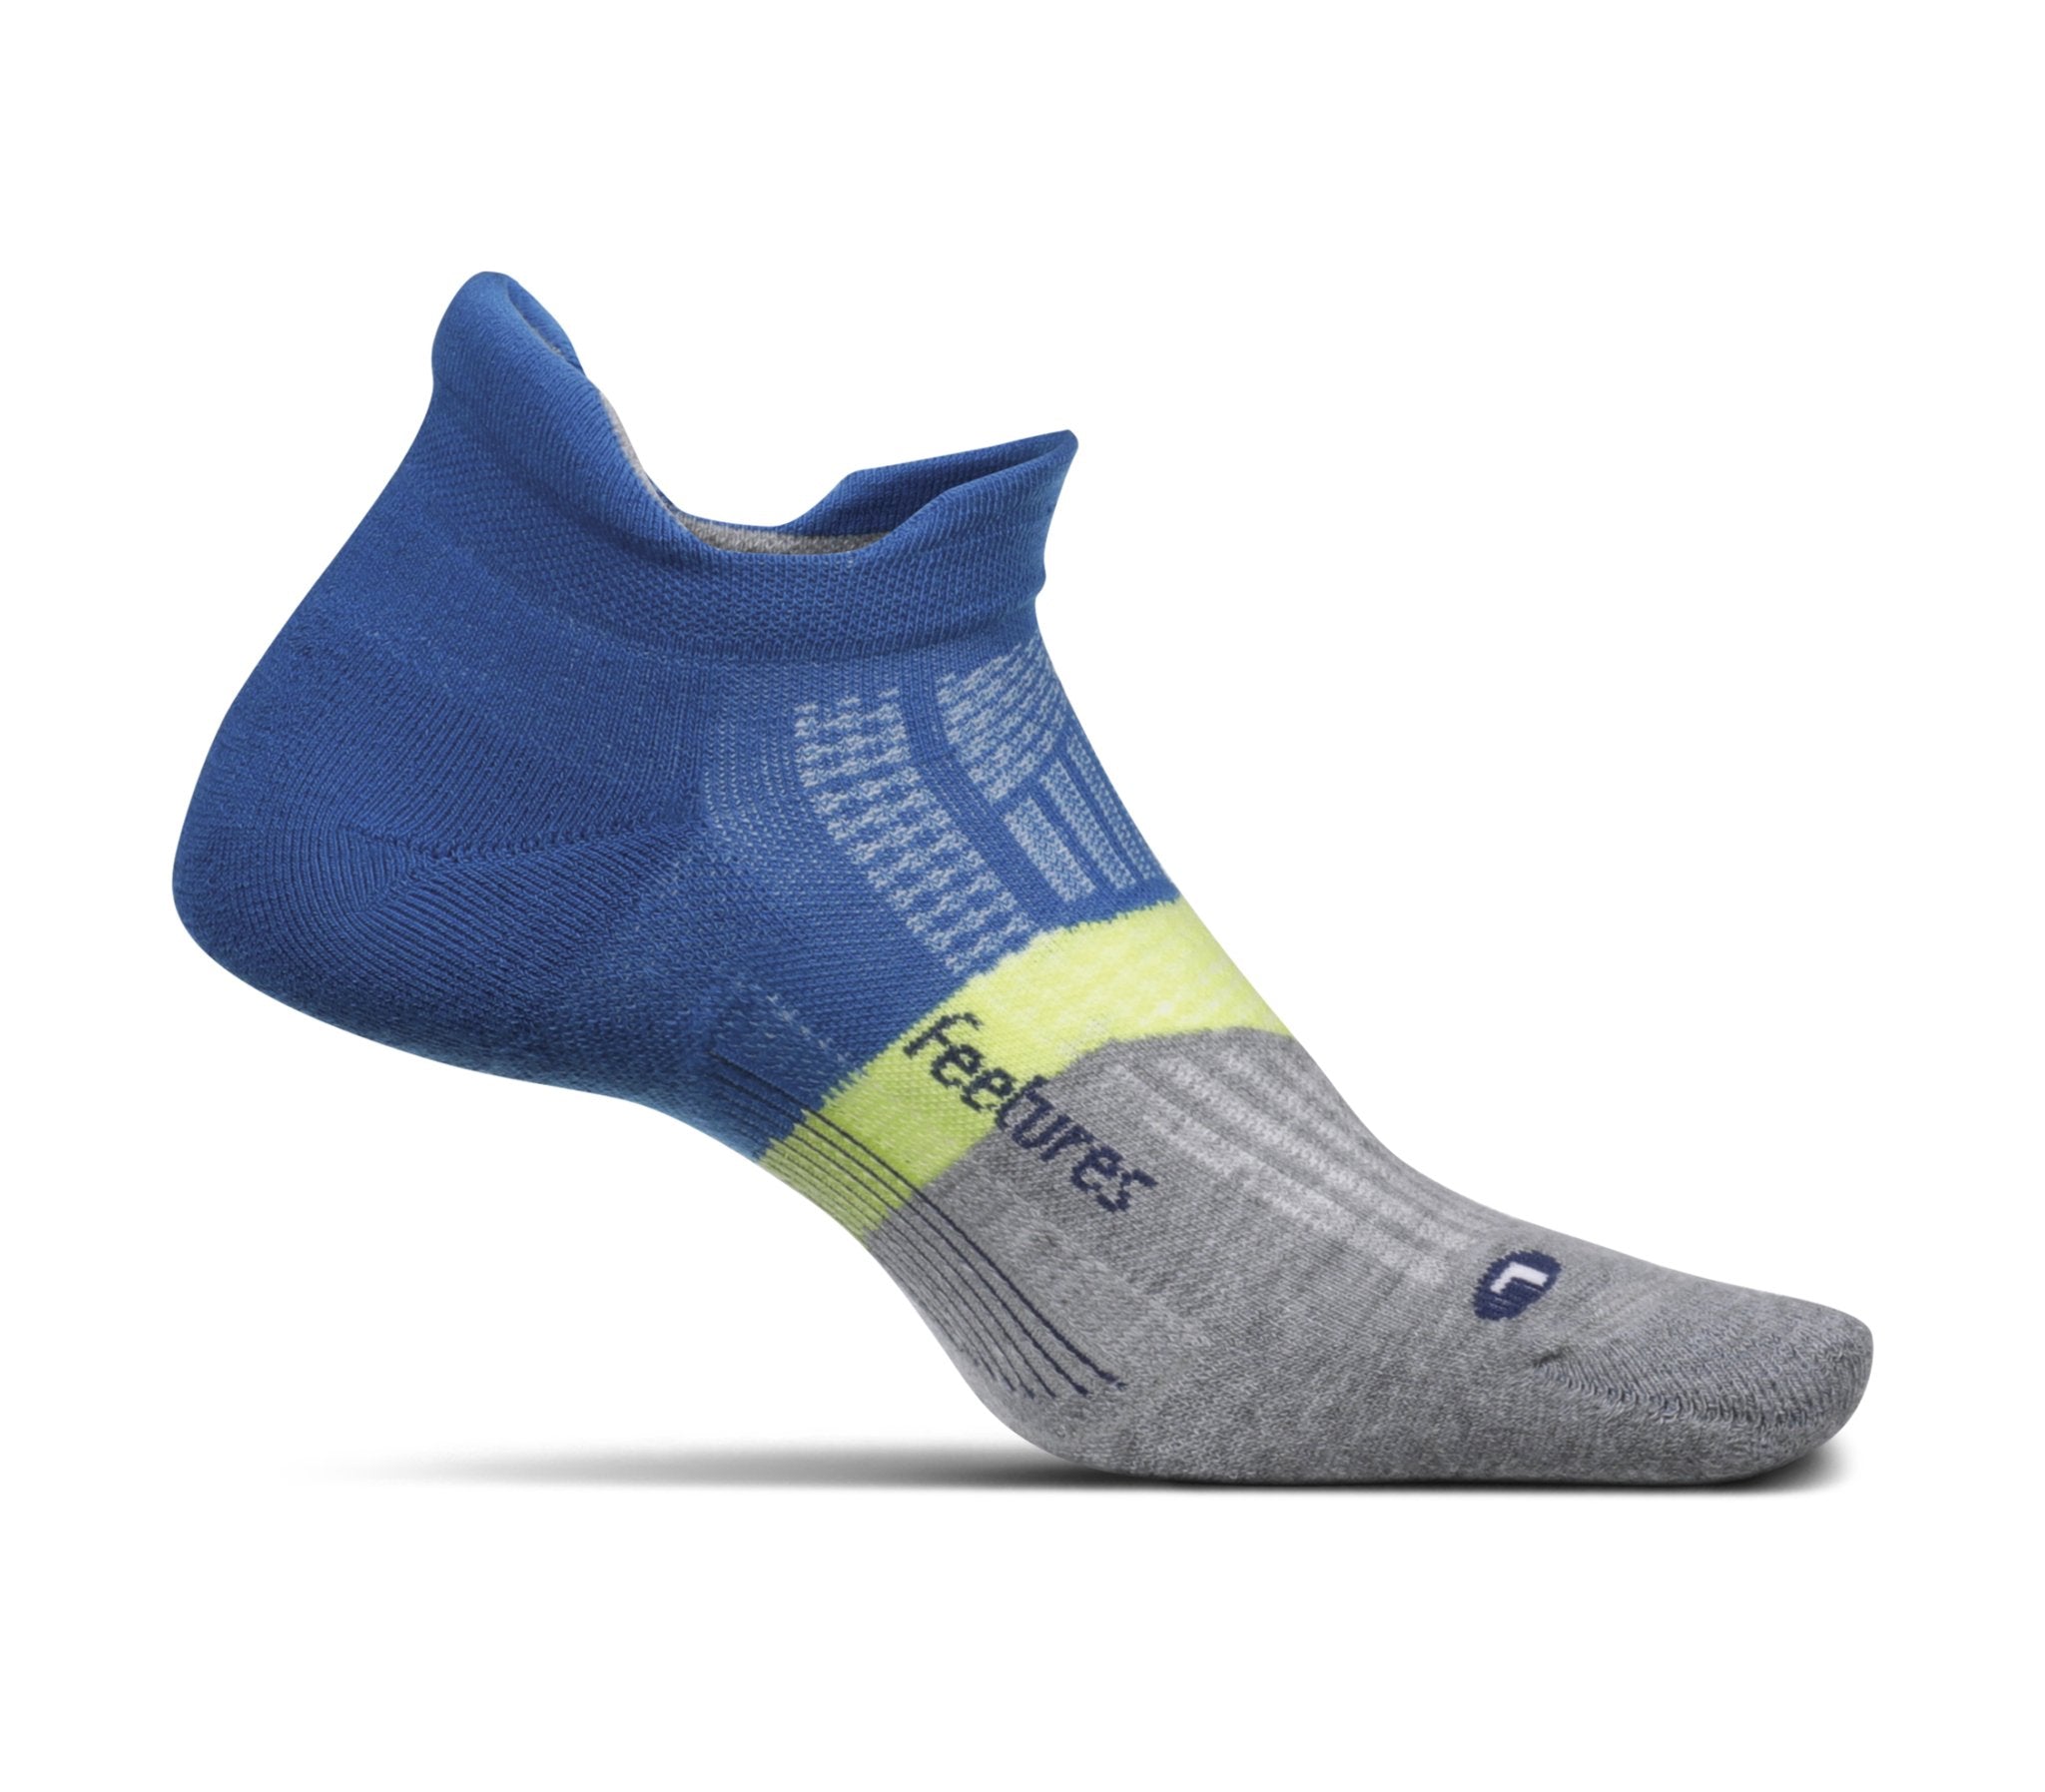 A medial view of the Feetures Elite Max Cushion running sock (left foot) in the color summer marine.